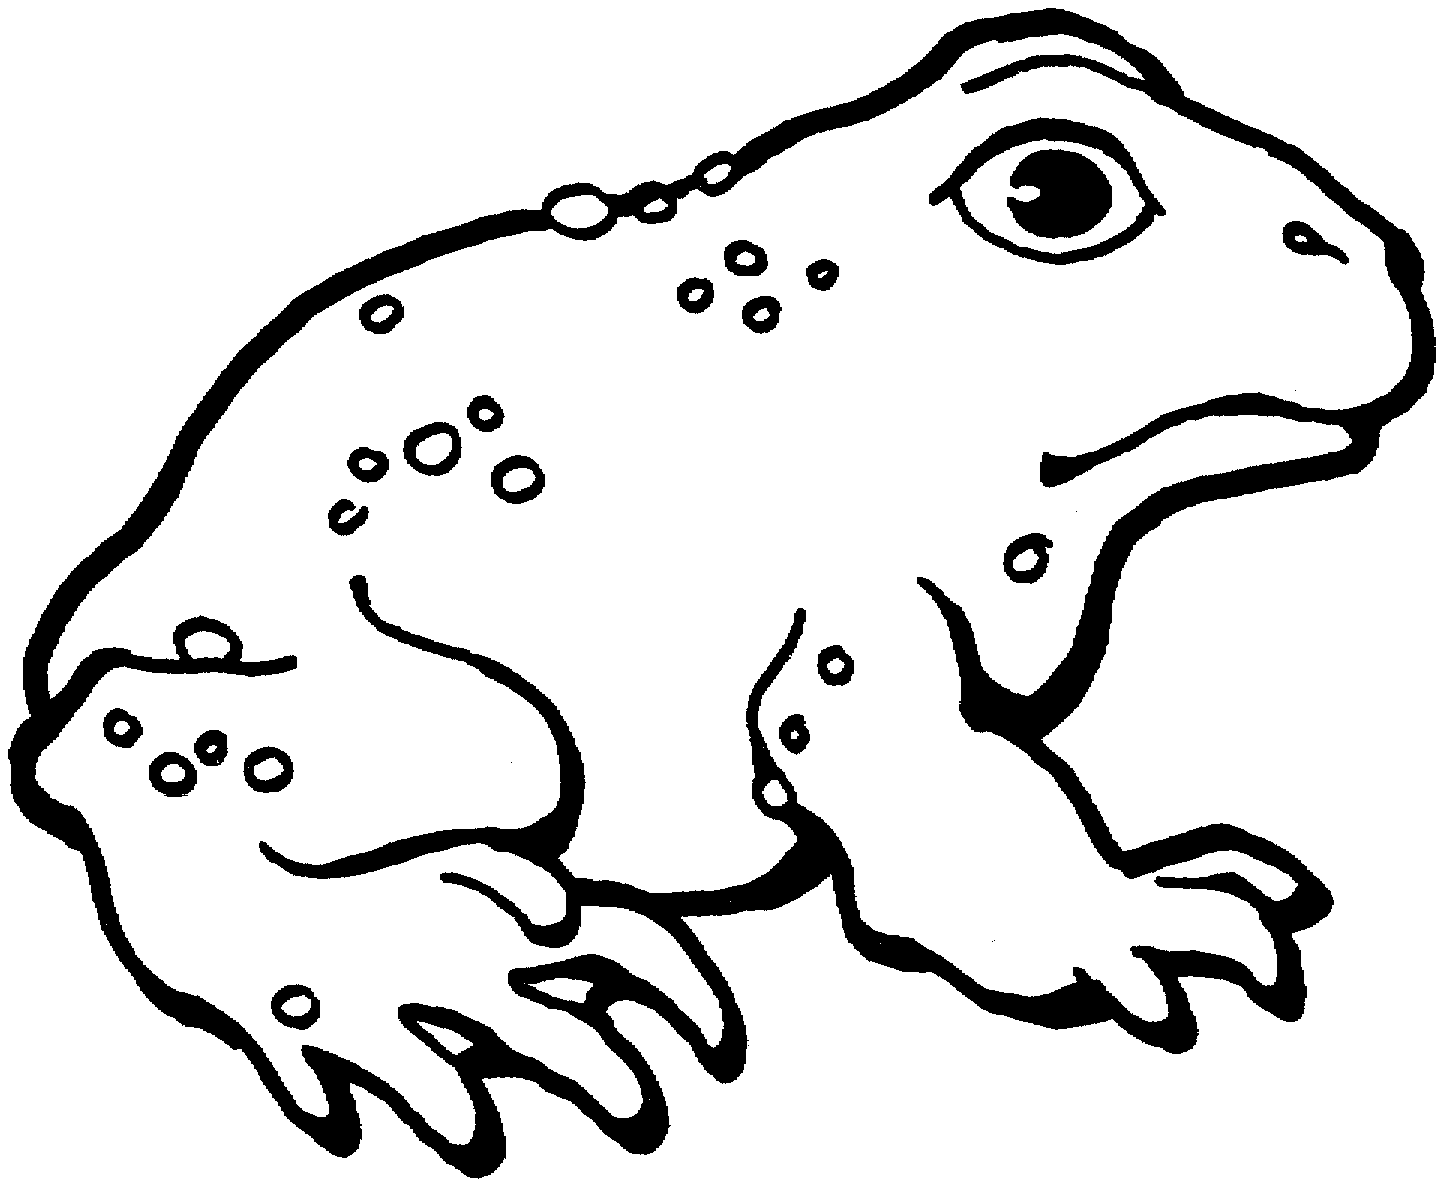 Cane Toad clipart #8, Download drawings